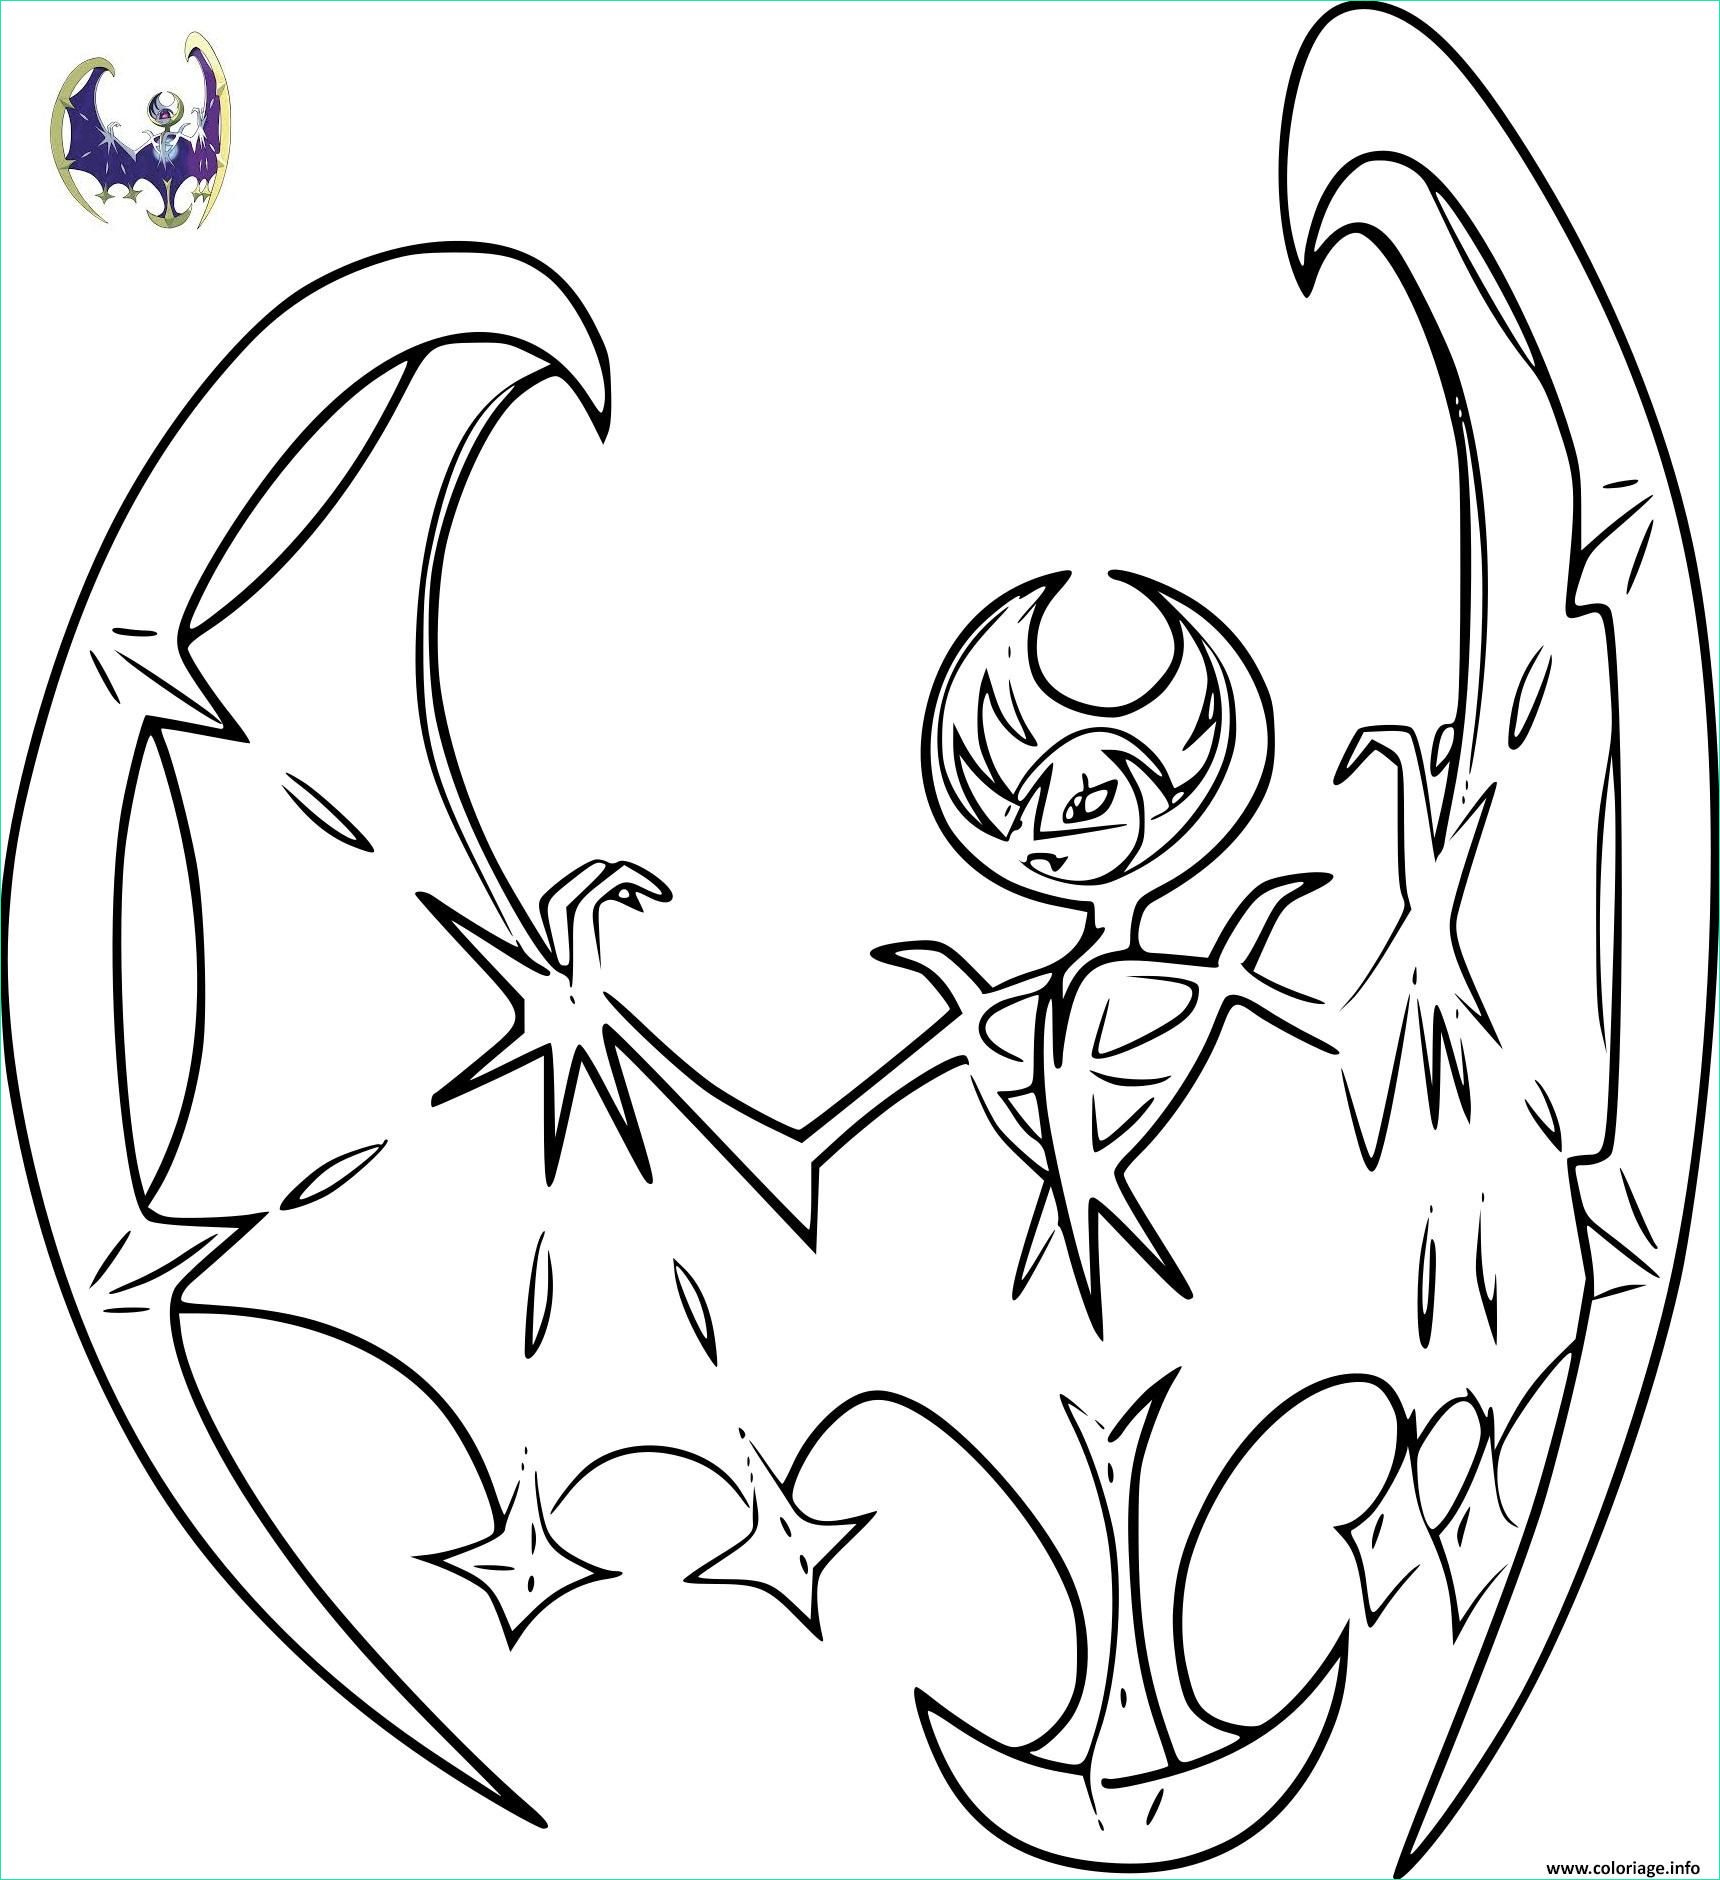 Pokemon Ultra soleil Coloriage Luxe Images 9 Élégant De Coloriage Pokemon Ultra soleil Stock